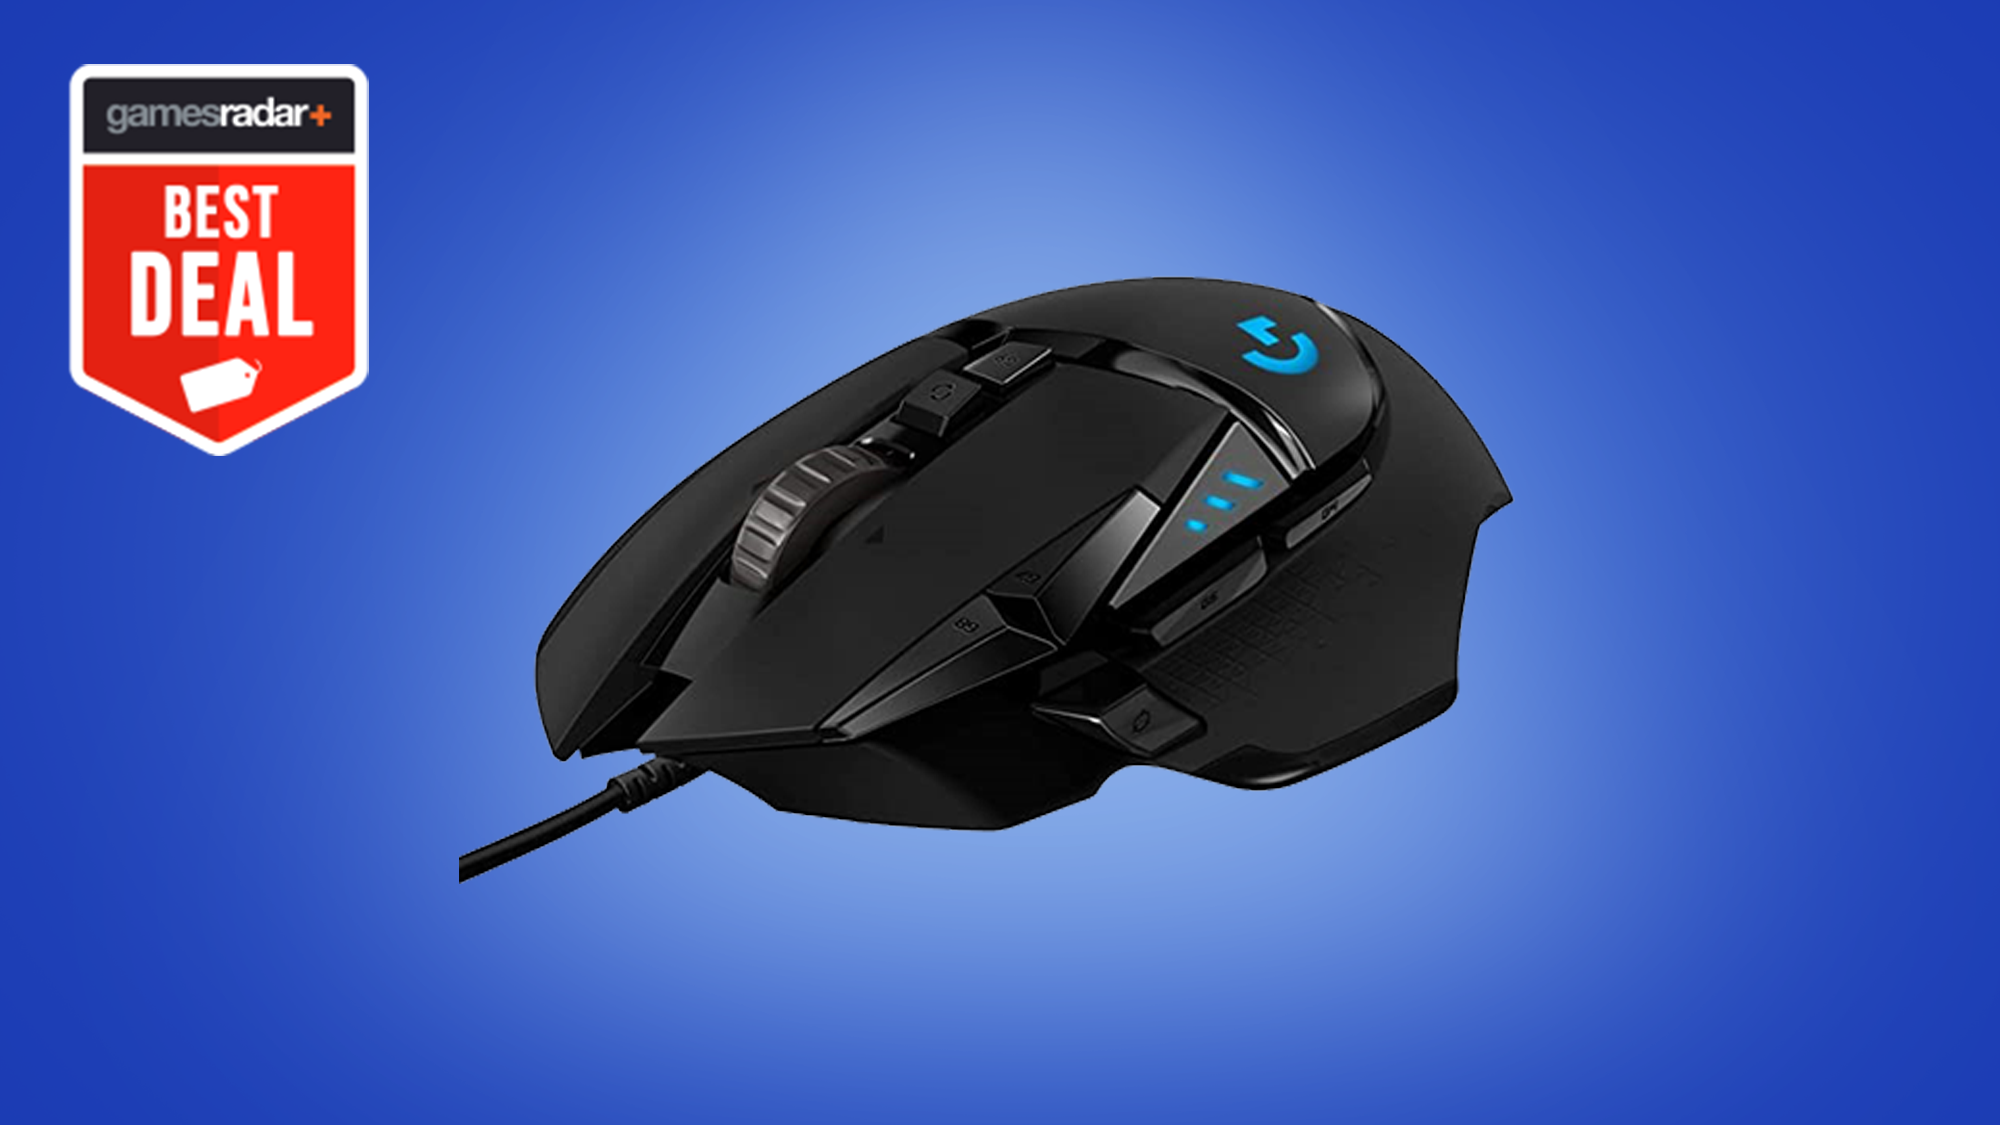 Logitech's G502 wireless gaming mouse is now less than half-price